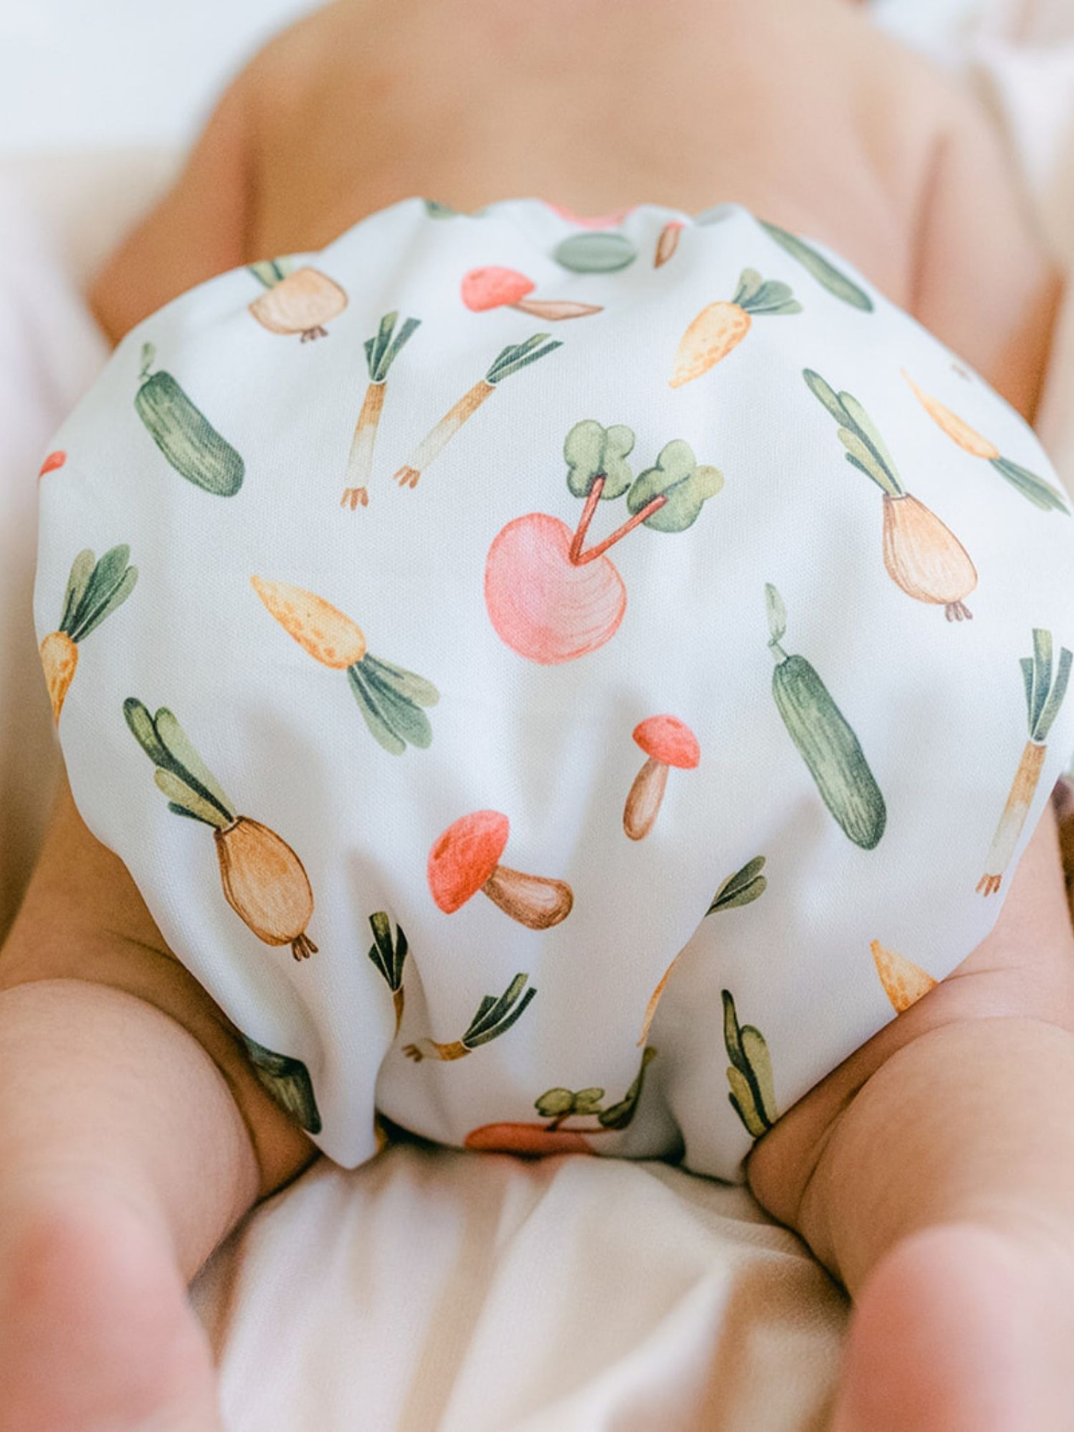 Just Peachy Cloth Diapers are designed to make fun, leak-proof and convenient diapering a reality. Set of 3 comes with: 3 diaper covers  (convertible Pocket/AI2), 3 super thirsty bamboo-cotton infant/booster inserts, and 3 super ultra absorbent hemp-cotton inserts. Shop now.